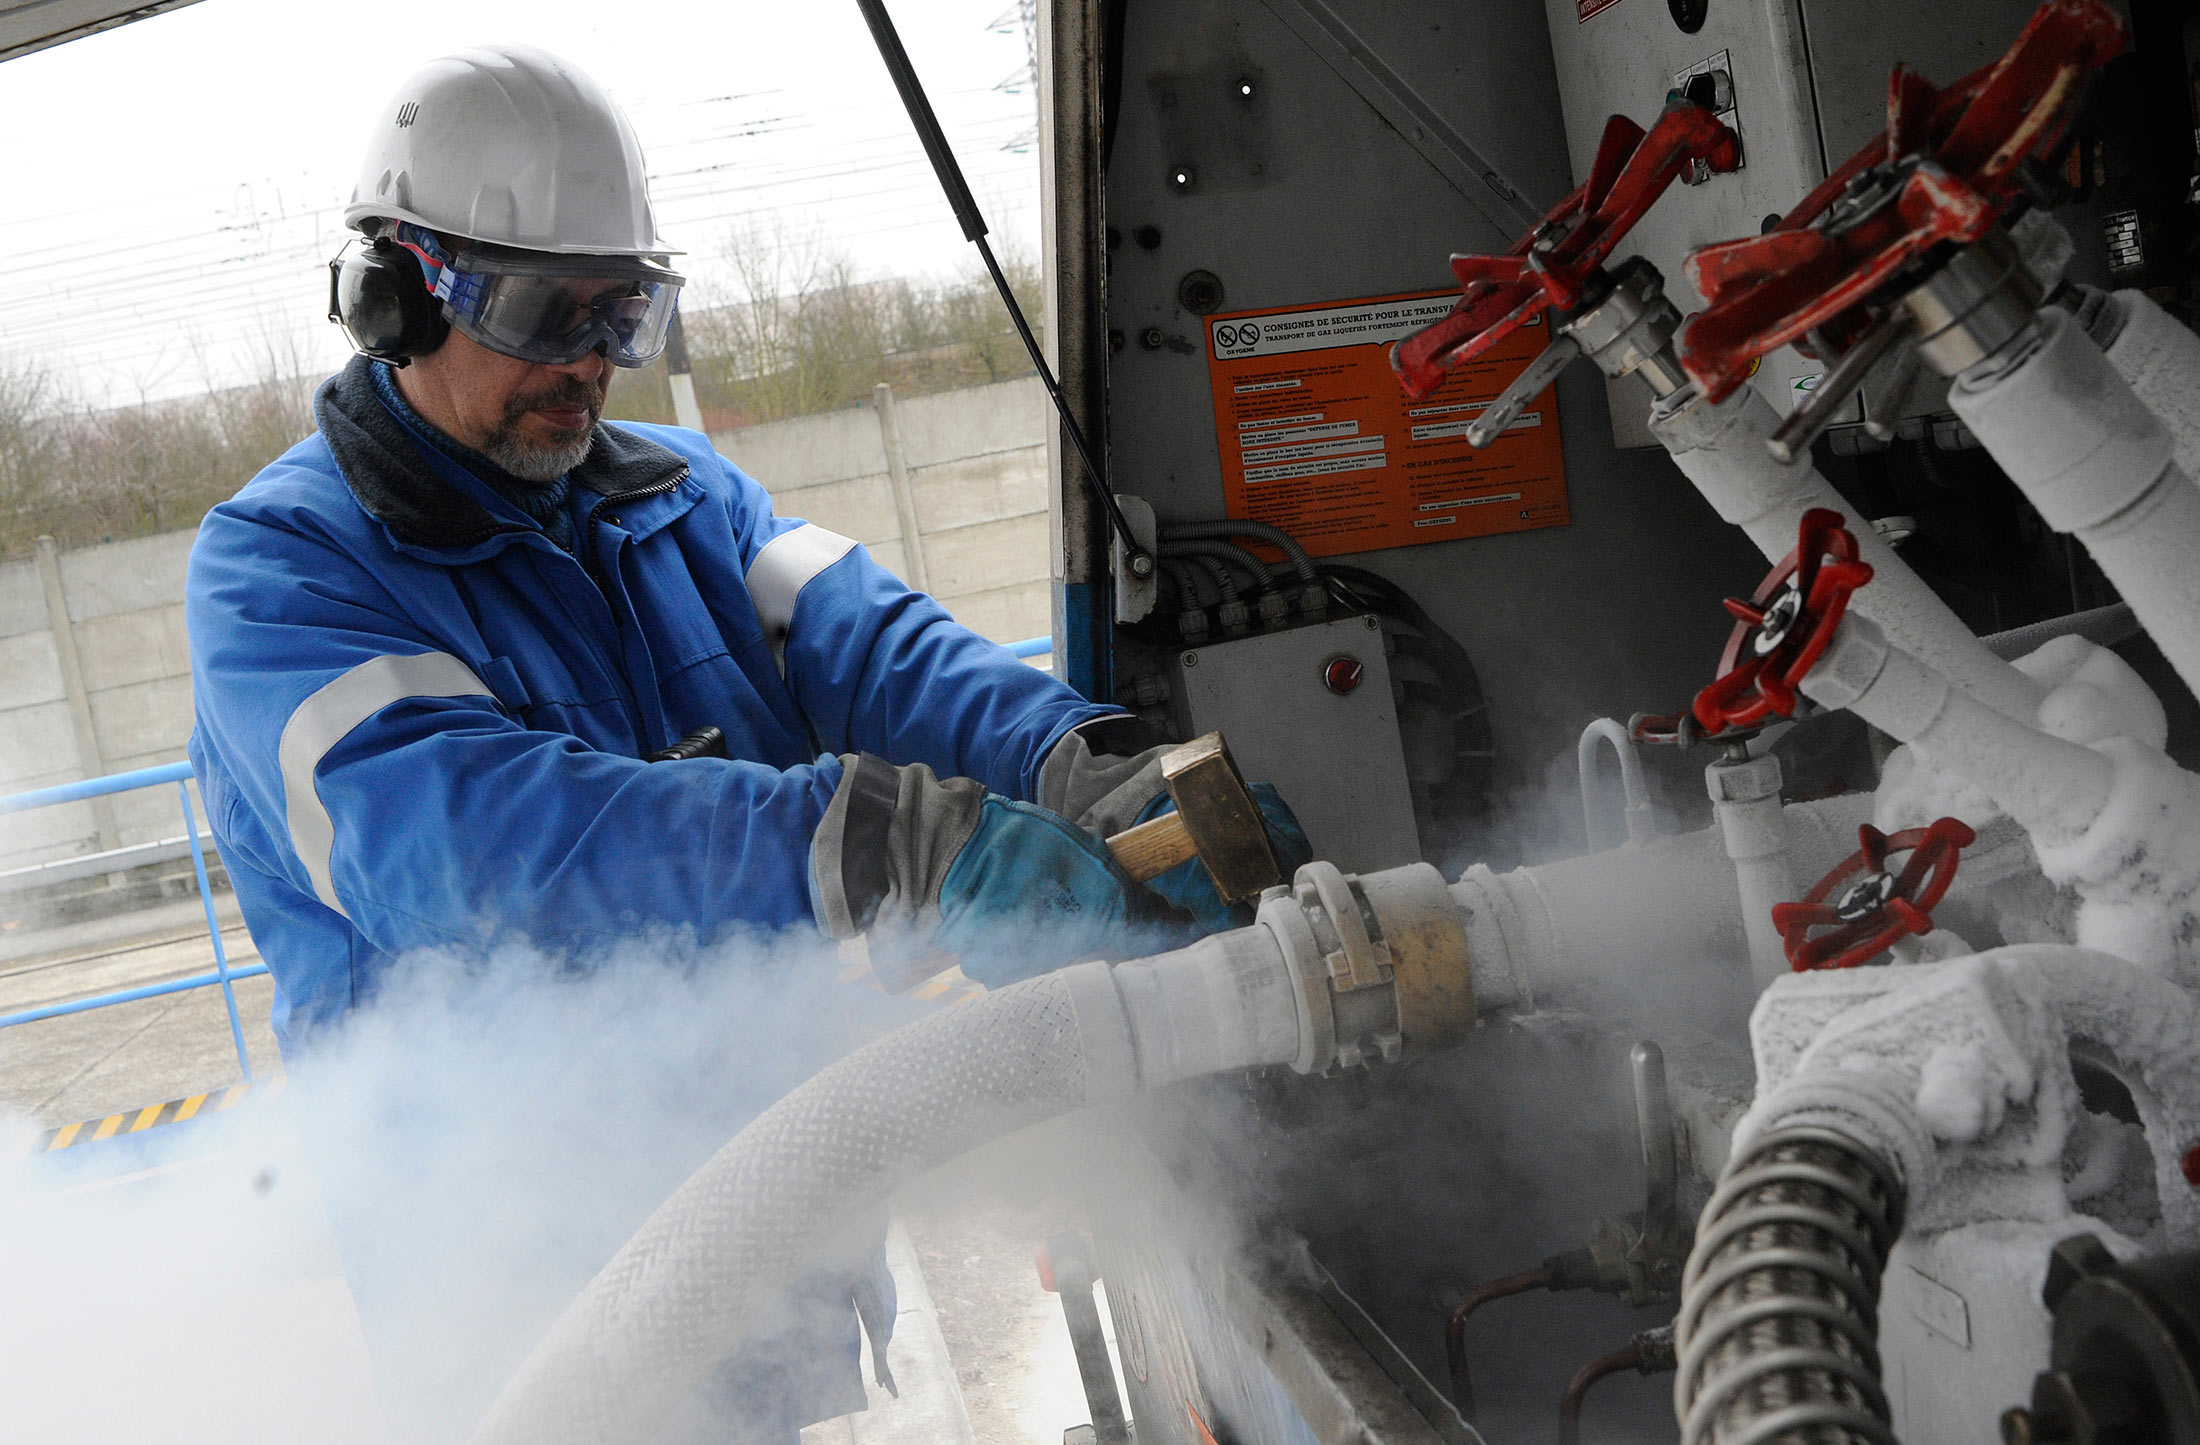 An employee checks valves at the Air Liquide SA factory in Moissy Cramayel, France, on Monday, Feb. 13, 2012.
